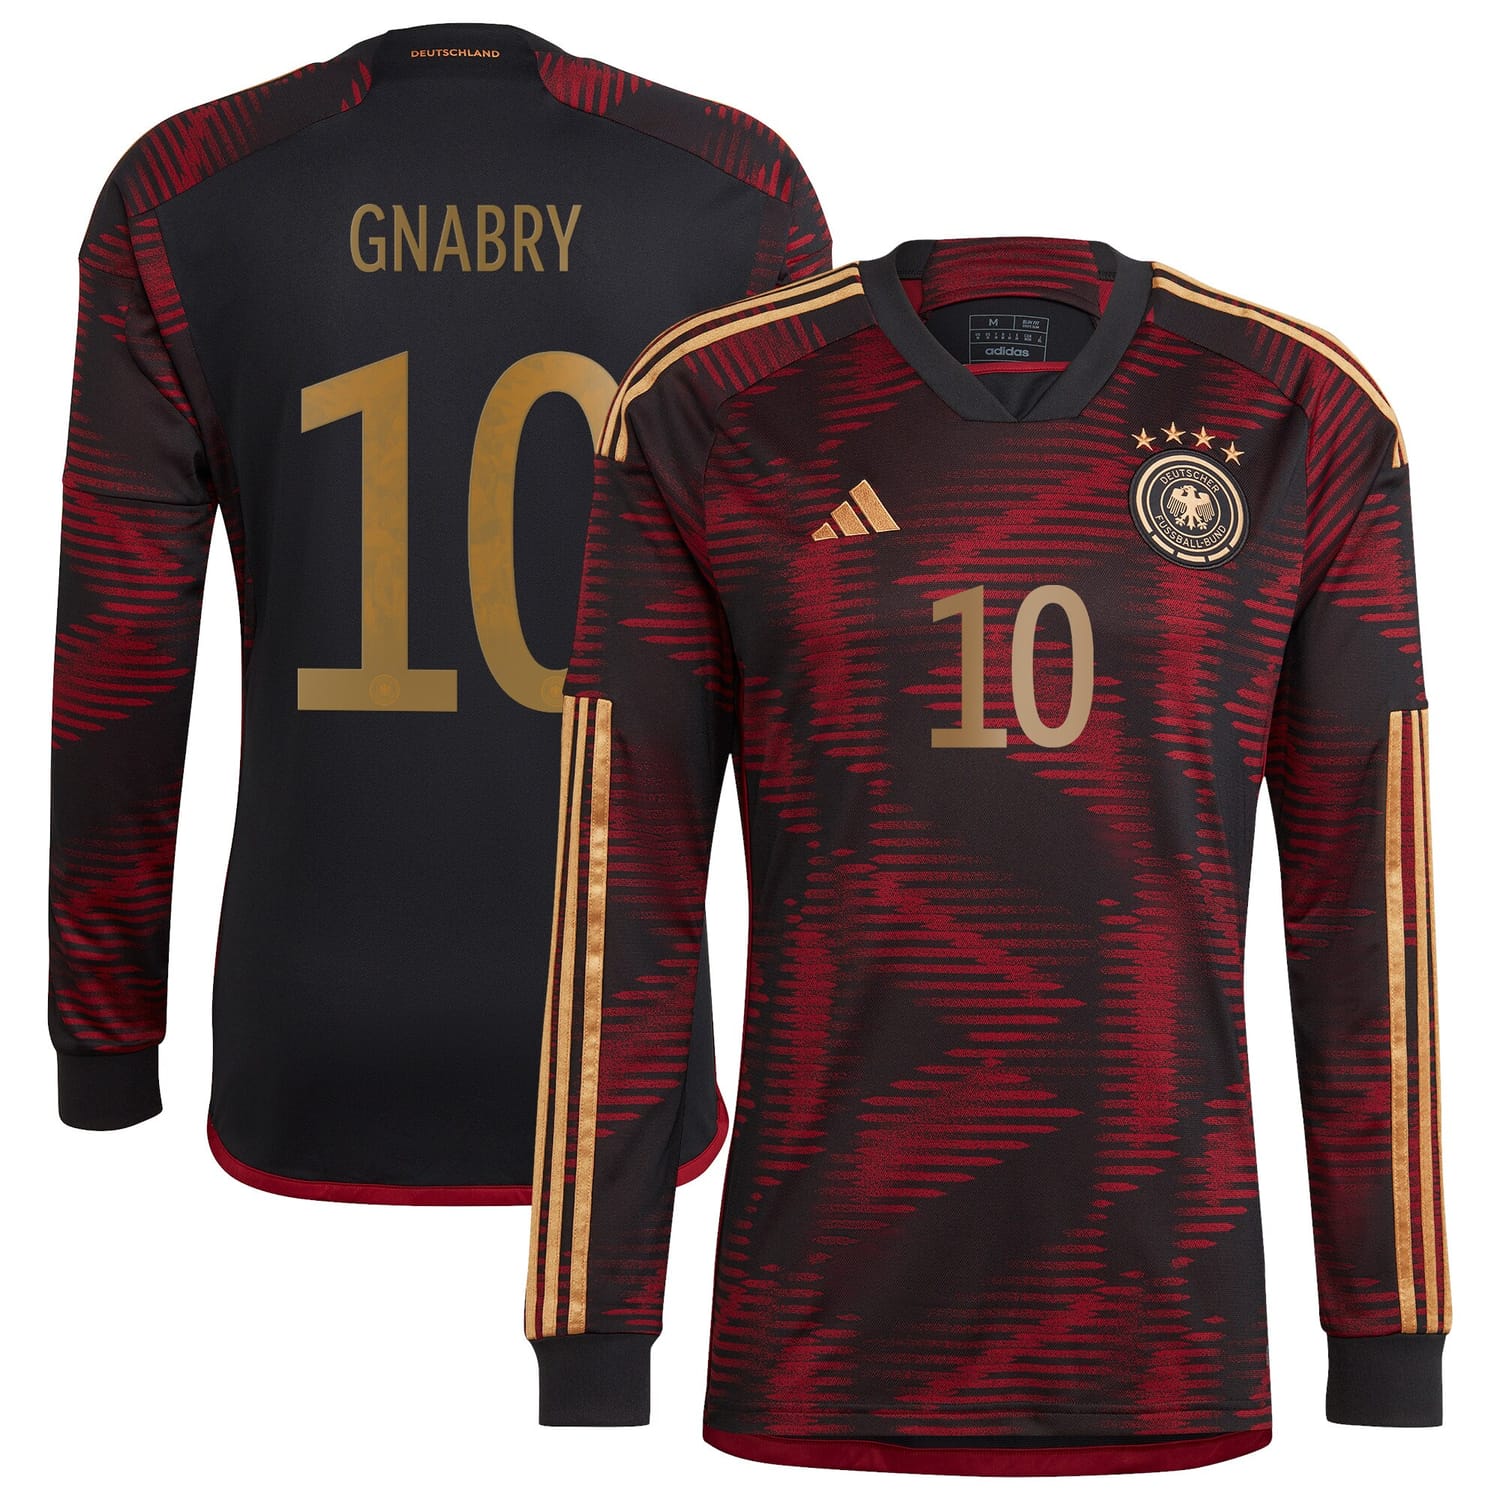 Germany National Team Away Jersey Shirt Long Sleeve player Serge Gnabry 10 printing for Men